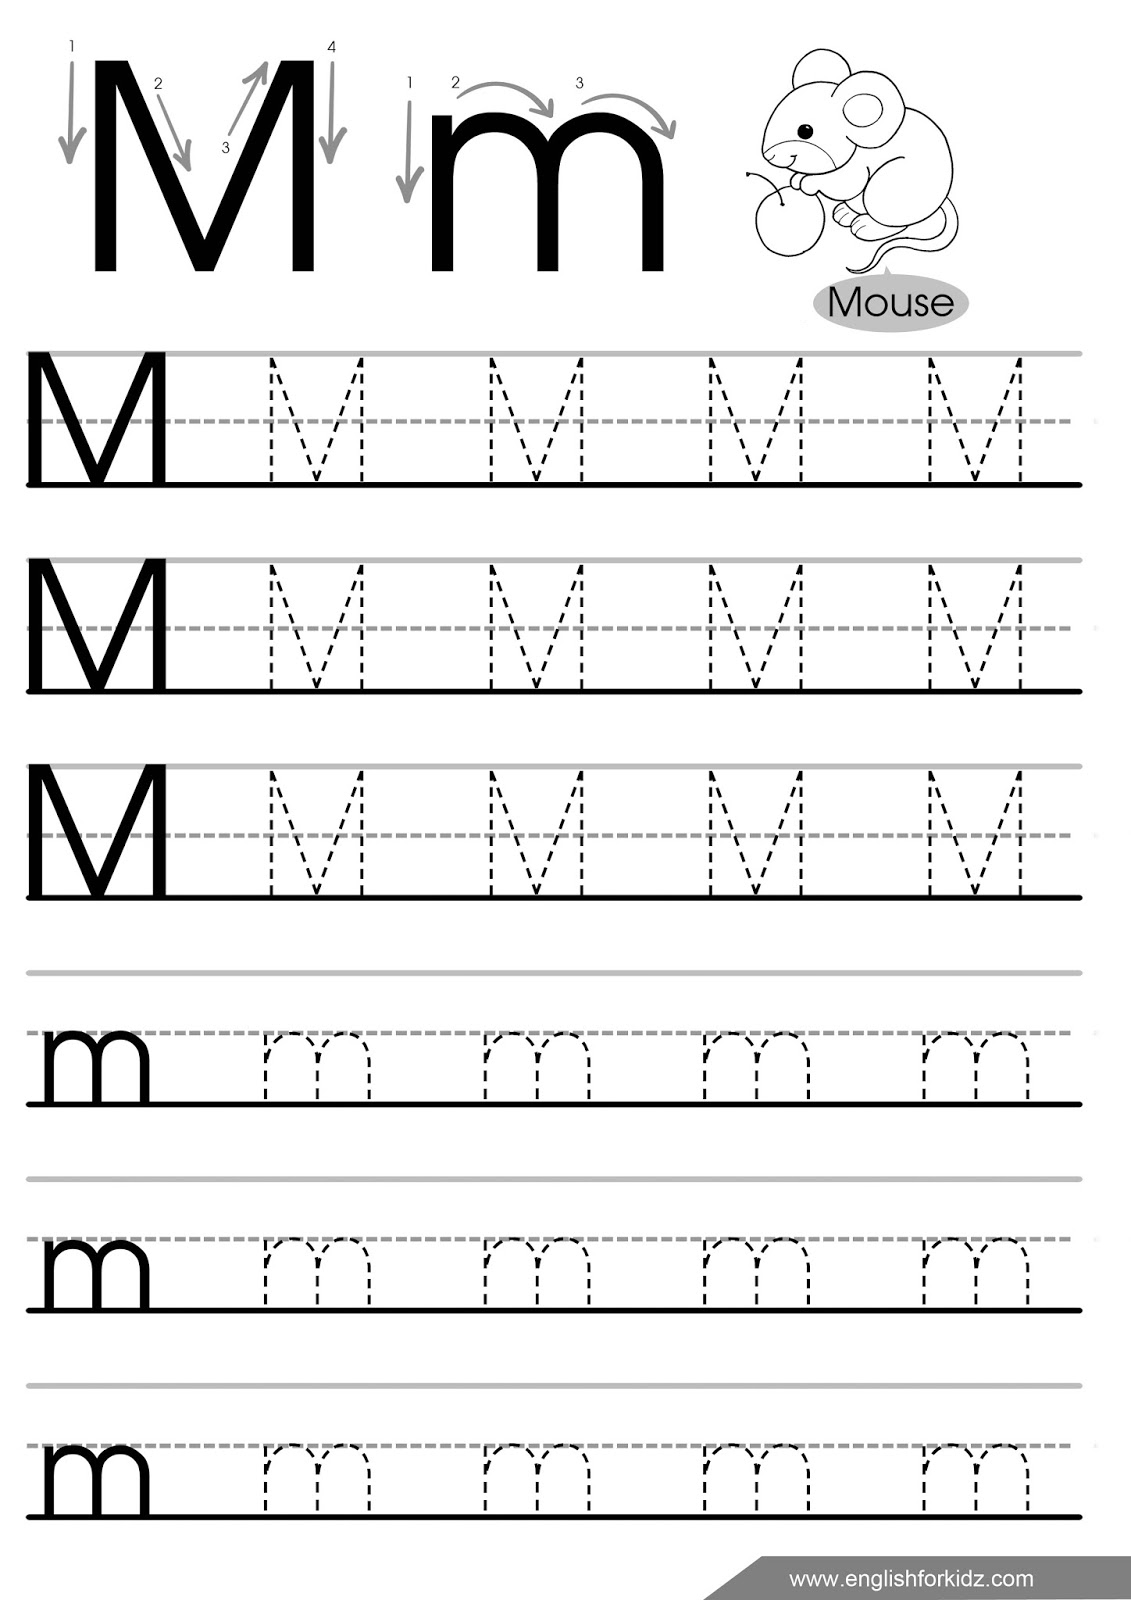 Letter M Worksheets, Flash Cards, Coloring Pages pertaining to Letter M Worksheets Tracing